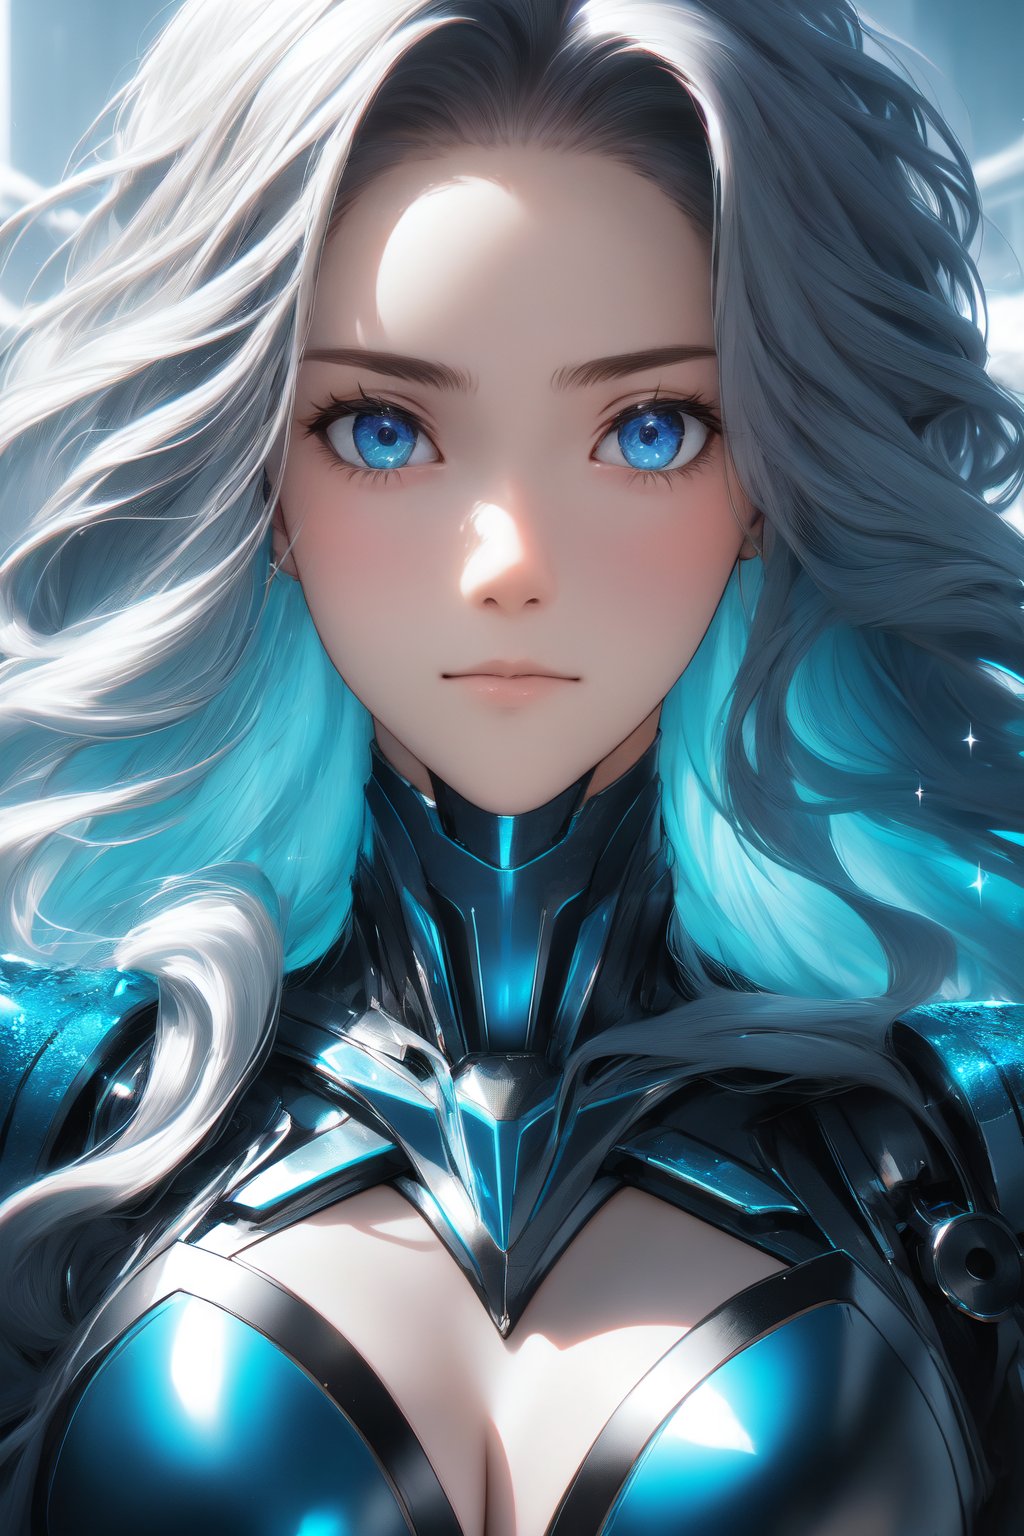 Close-up shot of JeeSoo, an elegant lady with long, flowing hair and piercing eyes. She wears a custom-designed high-tech cyberpunk blue suit that radiates a radiant glow. The suit's intricate details sparkle under the soft, icy lighting. Her gaze directly confronts the viewer, sword raised in a powerful pose. The composition emphasizes her beauty, set against a futuristic backdrop with mecha elements. The image is rendered in stunning 8K resolution, showcasing every detail with sharp focus and realistic texture.,Asia